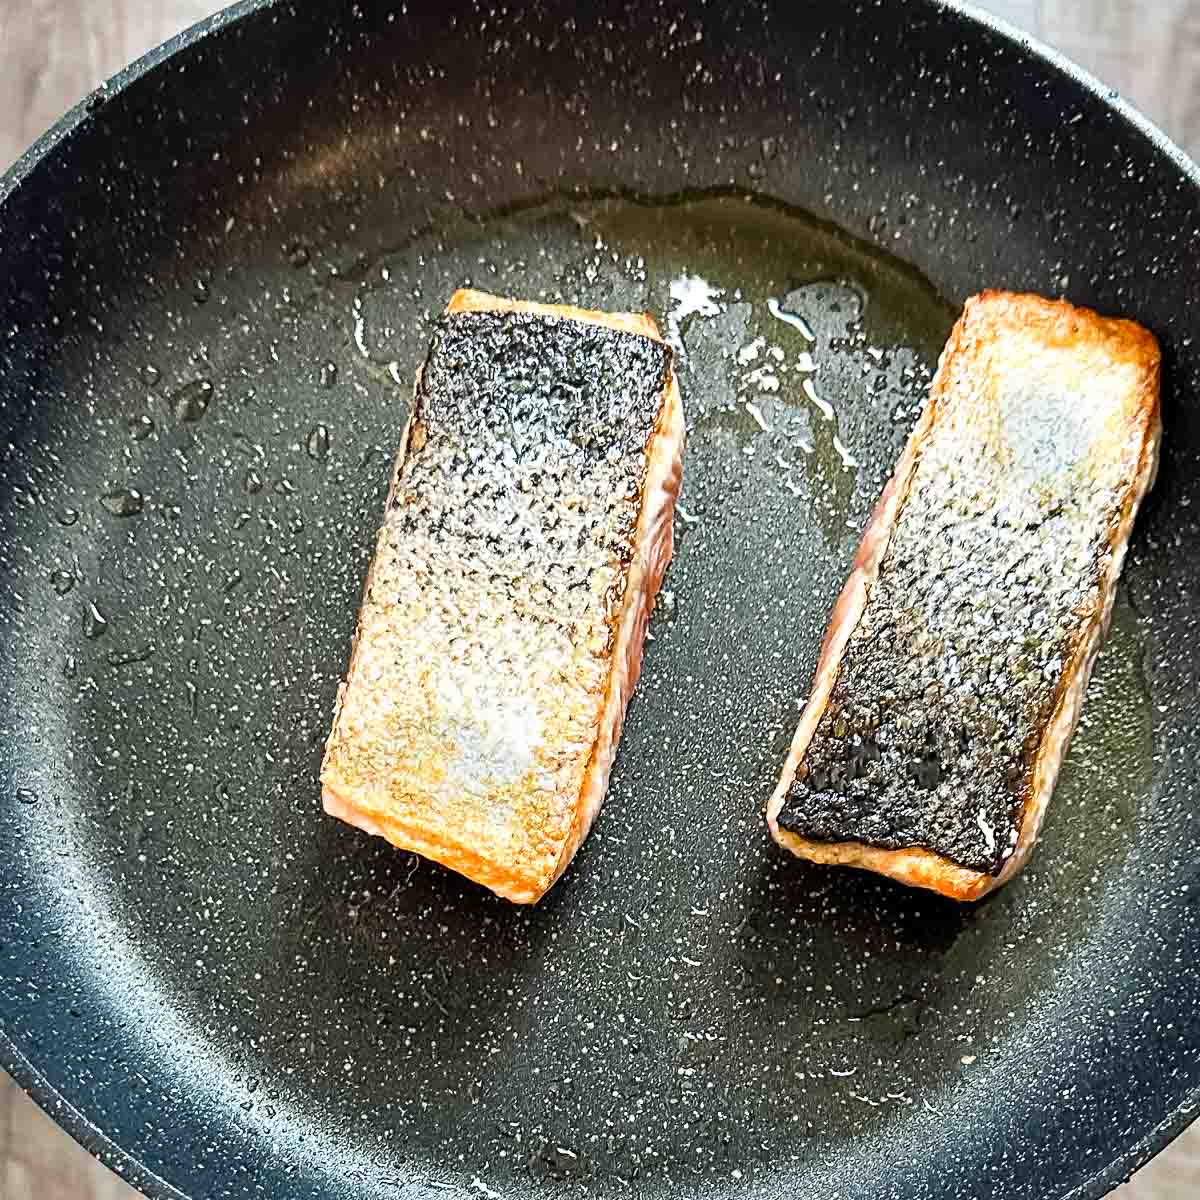 Salmon fillets are cooked skin-side up in a frying pan.